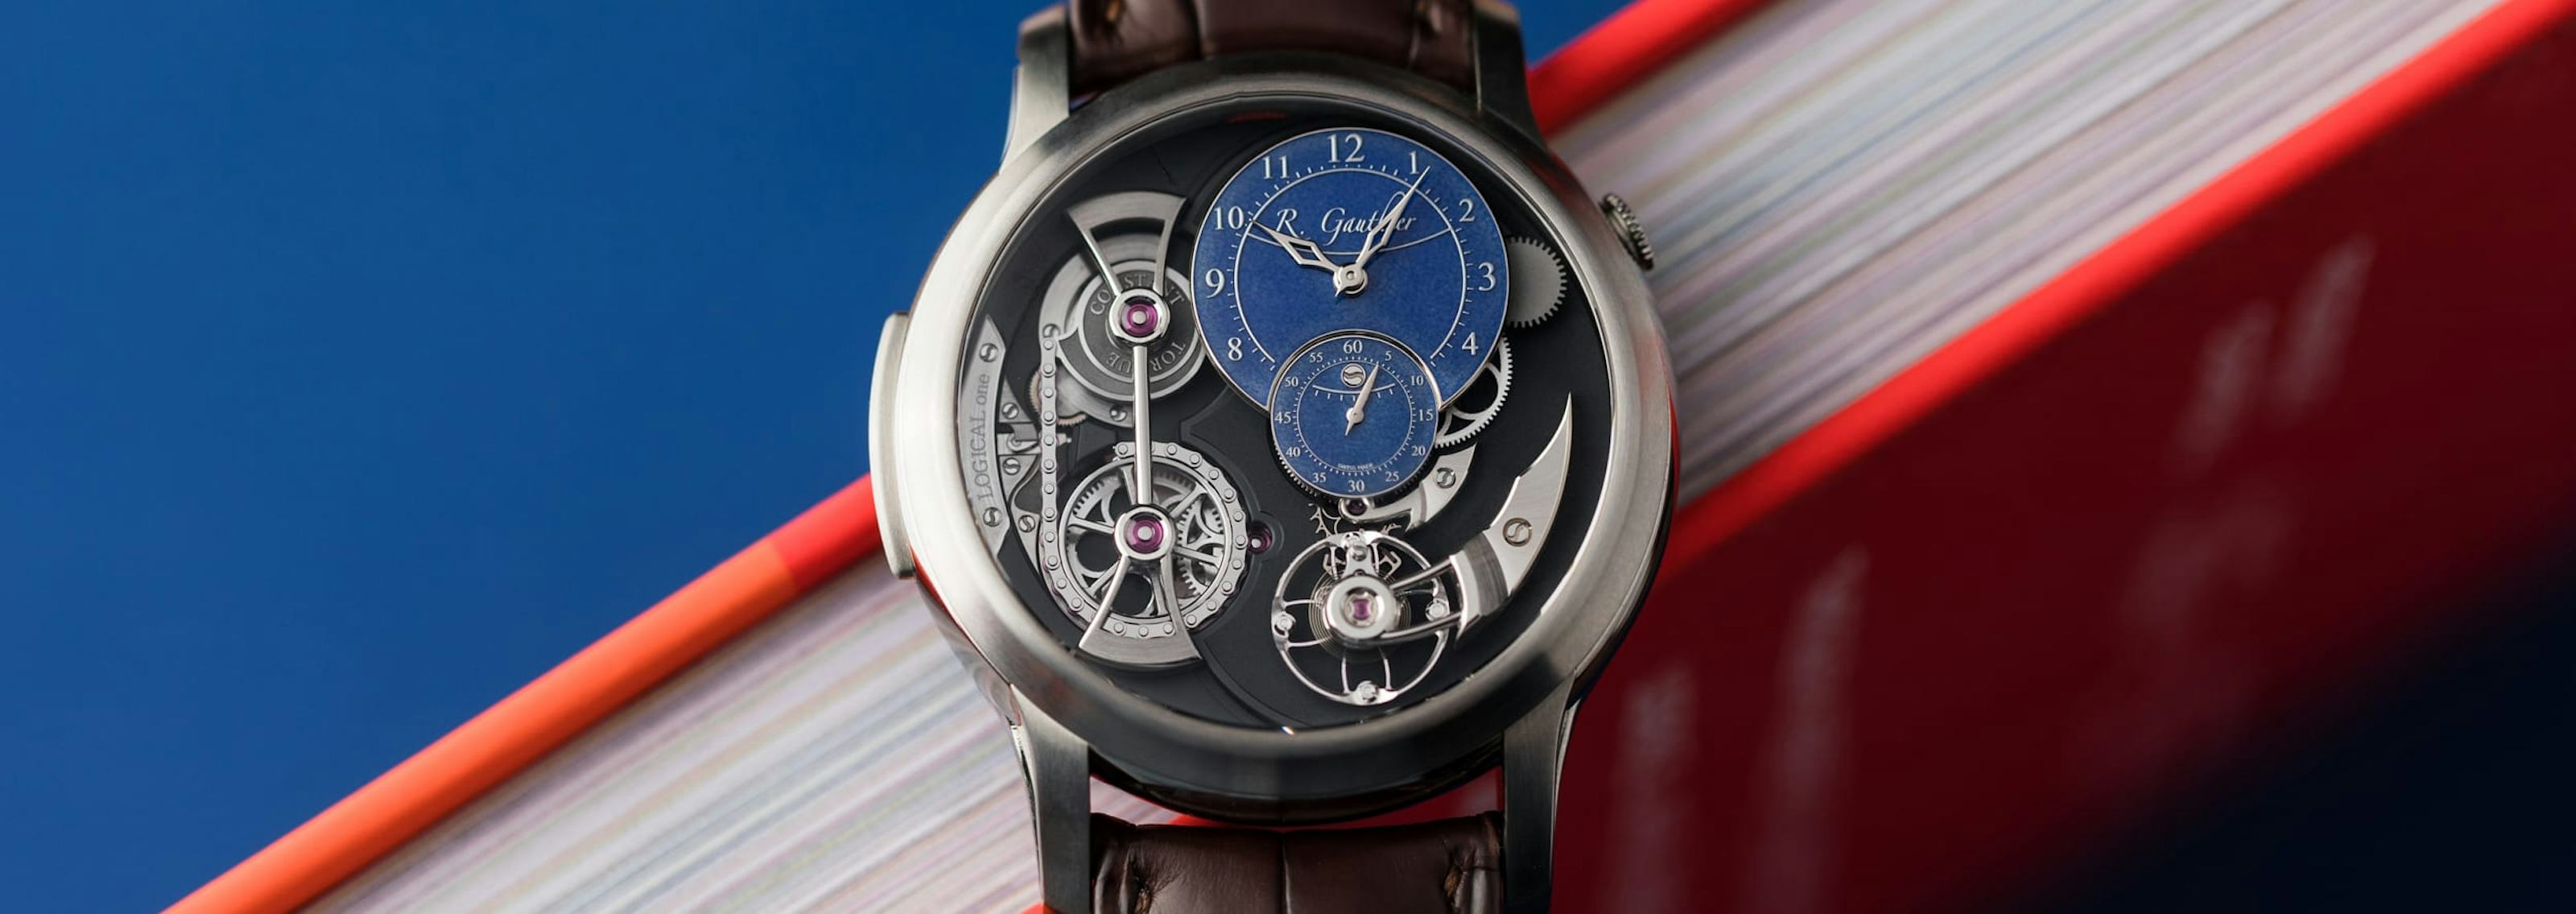 In Focus: Romain Gauthier Logical One